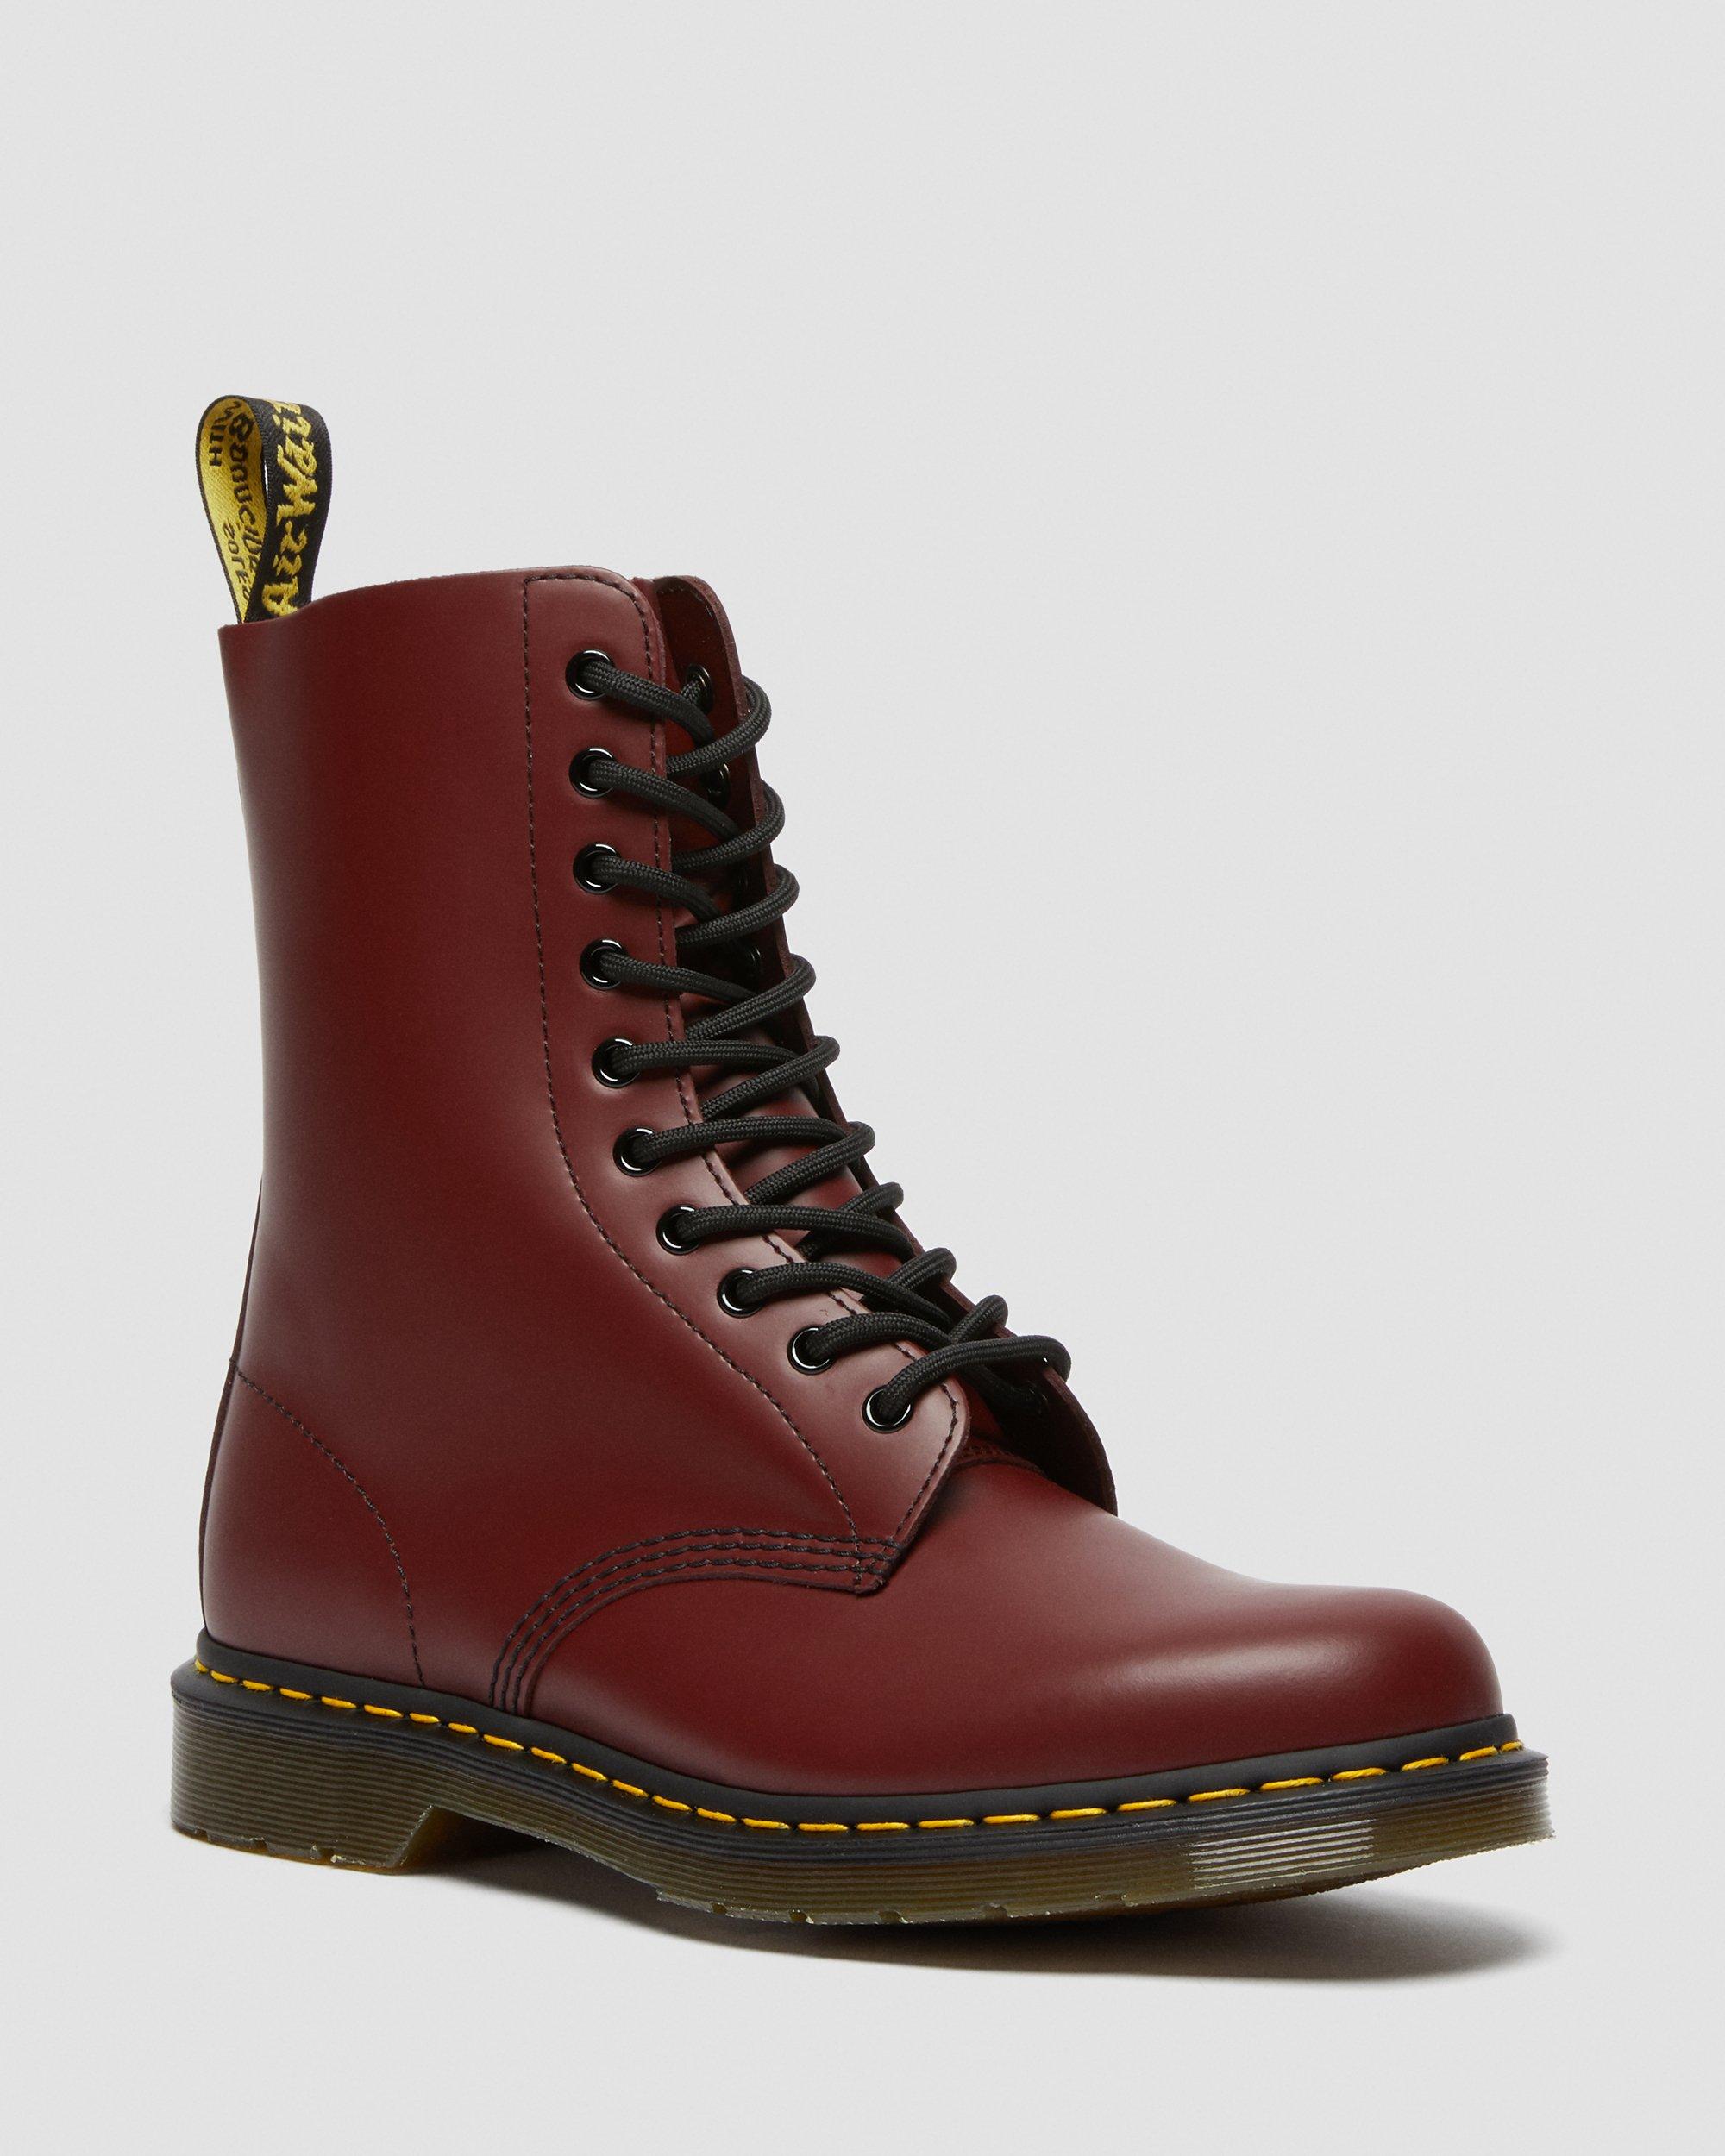 1490 Smooth Leather High Lace Up Boots, Cherry Red | Dr. Martens